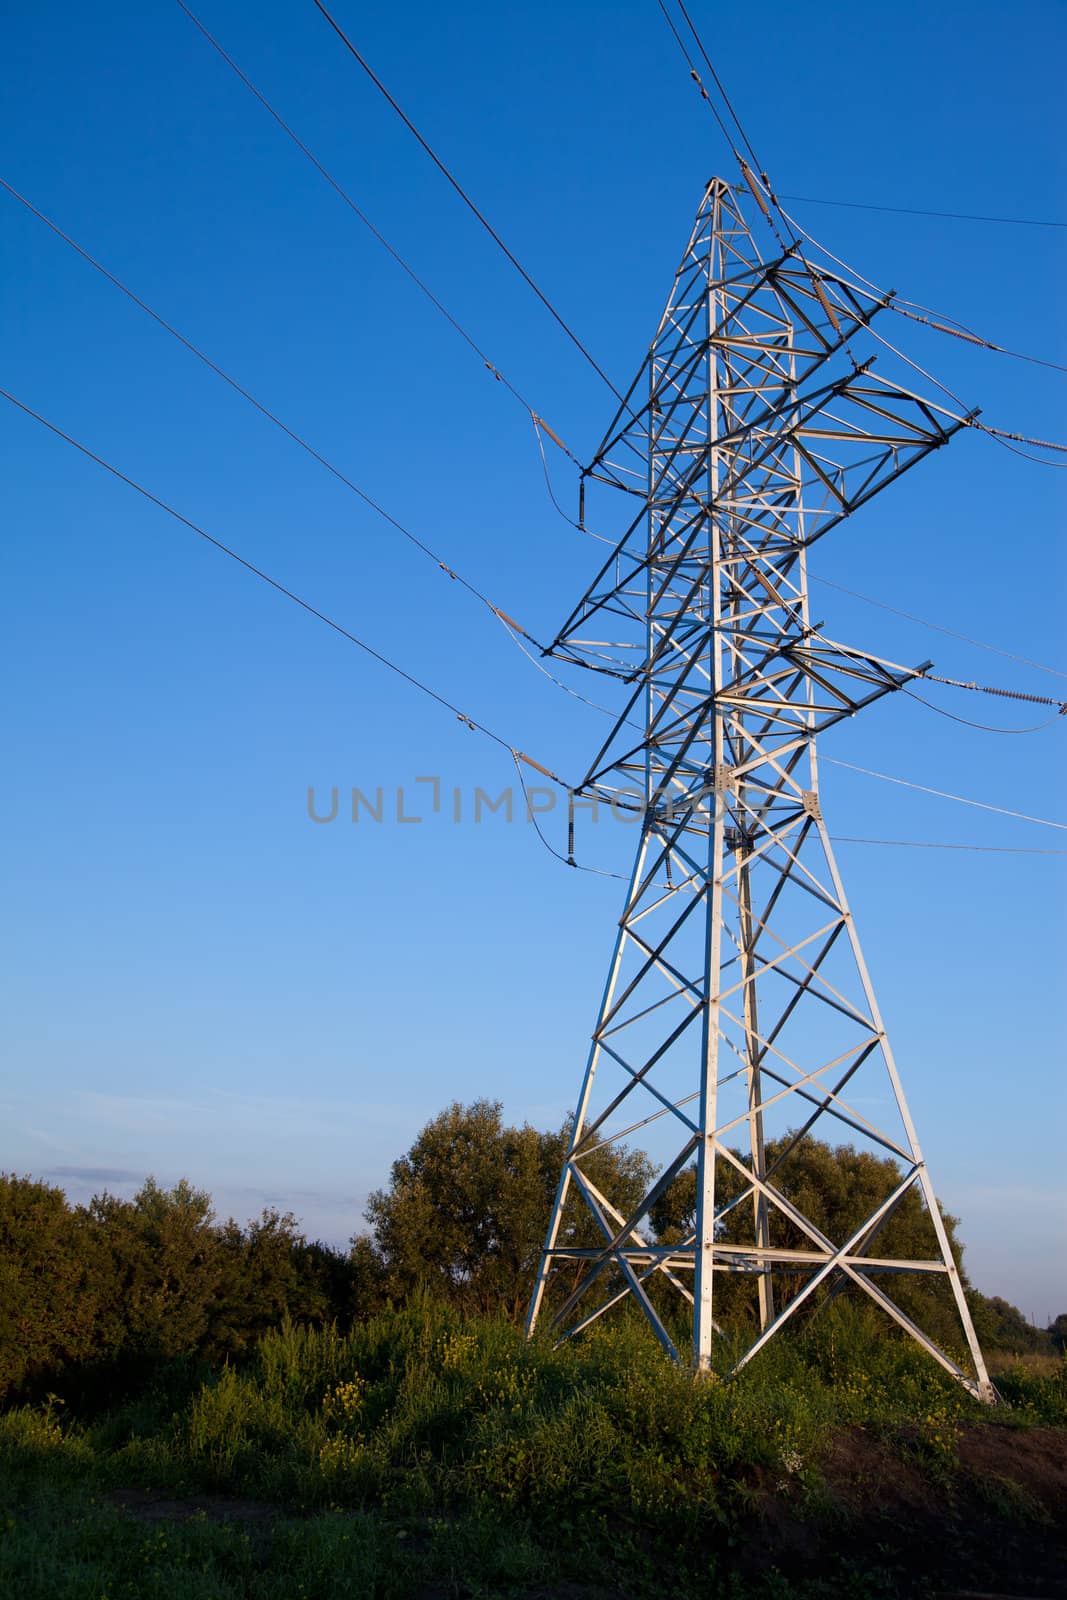 New electric power lines tower in a swampy field over blue morning sky